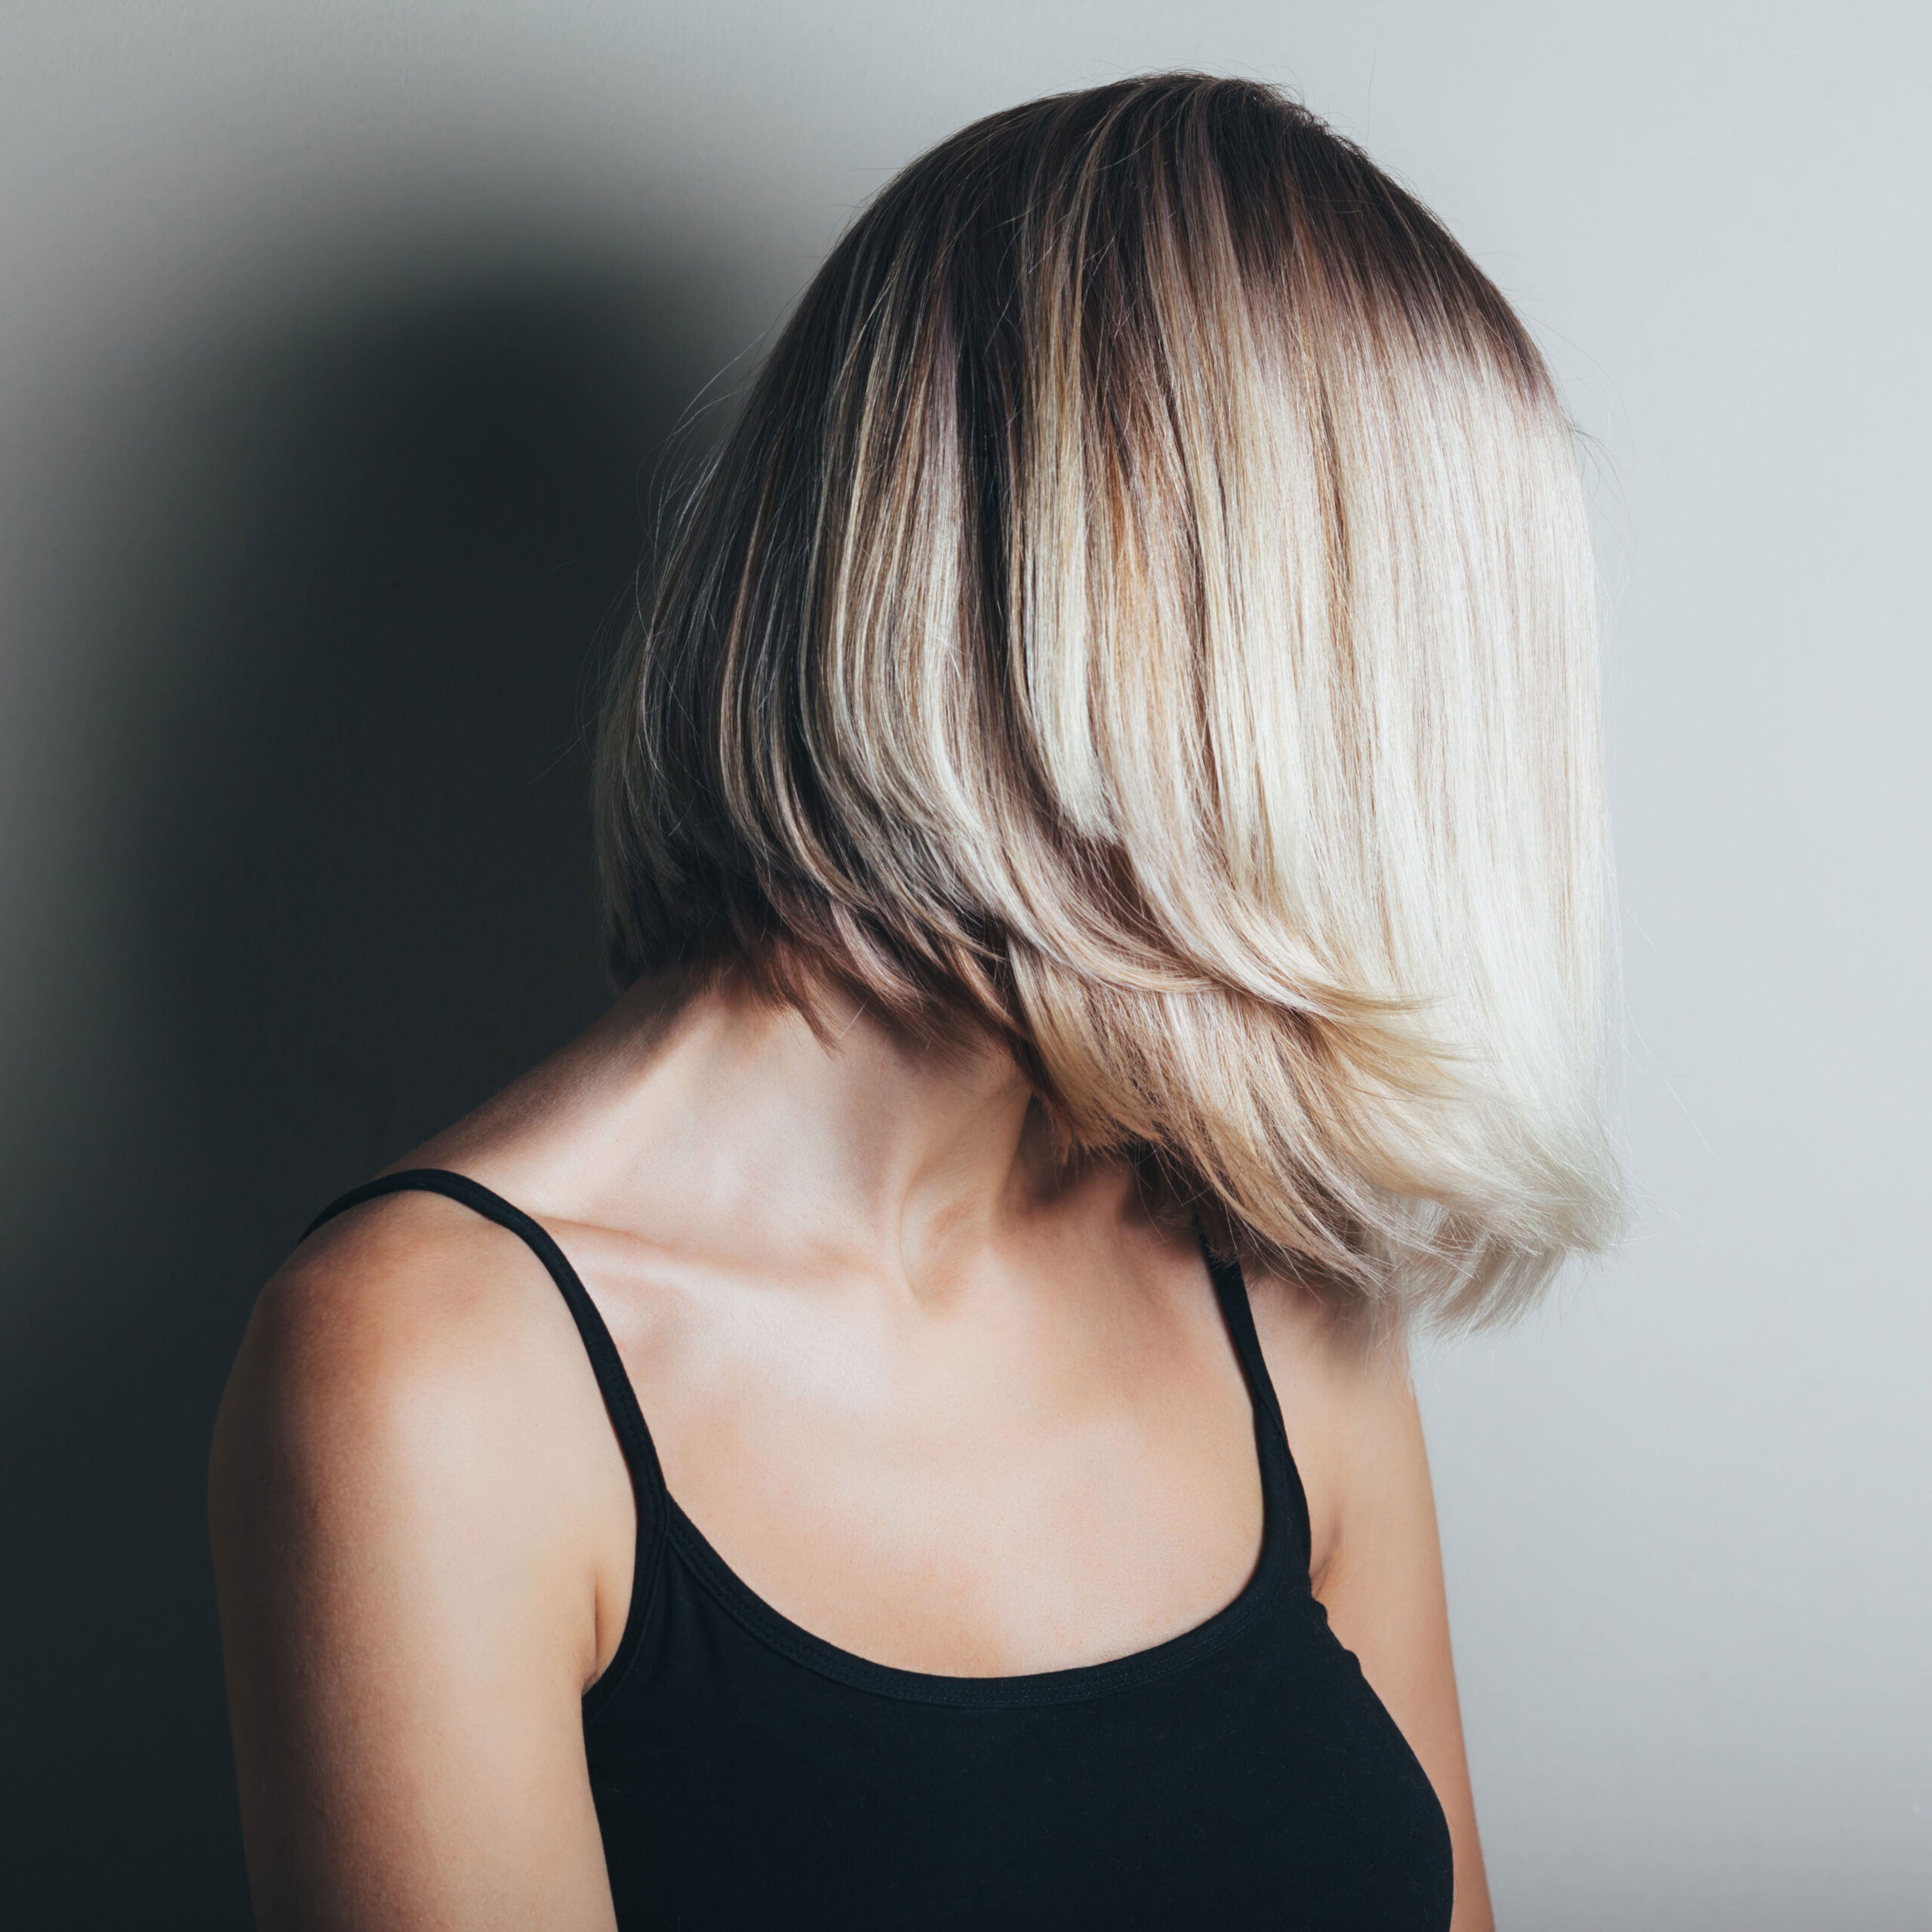 Hair Styling Tricks Stylists Swear By To Hide Thinning: Curtain Bangs And  More - SHEfinds